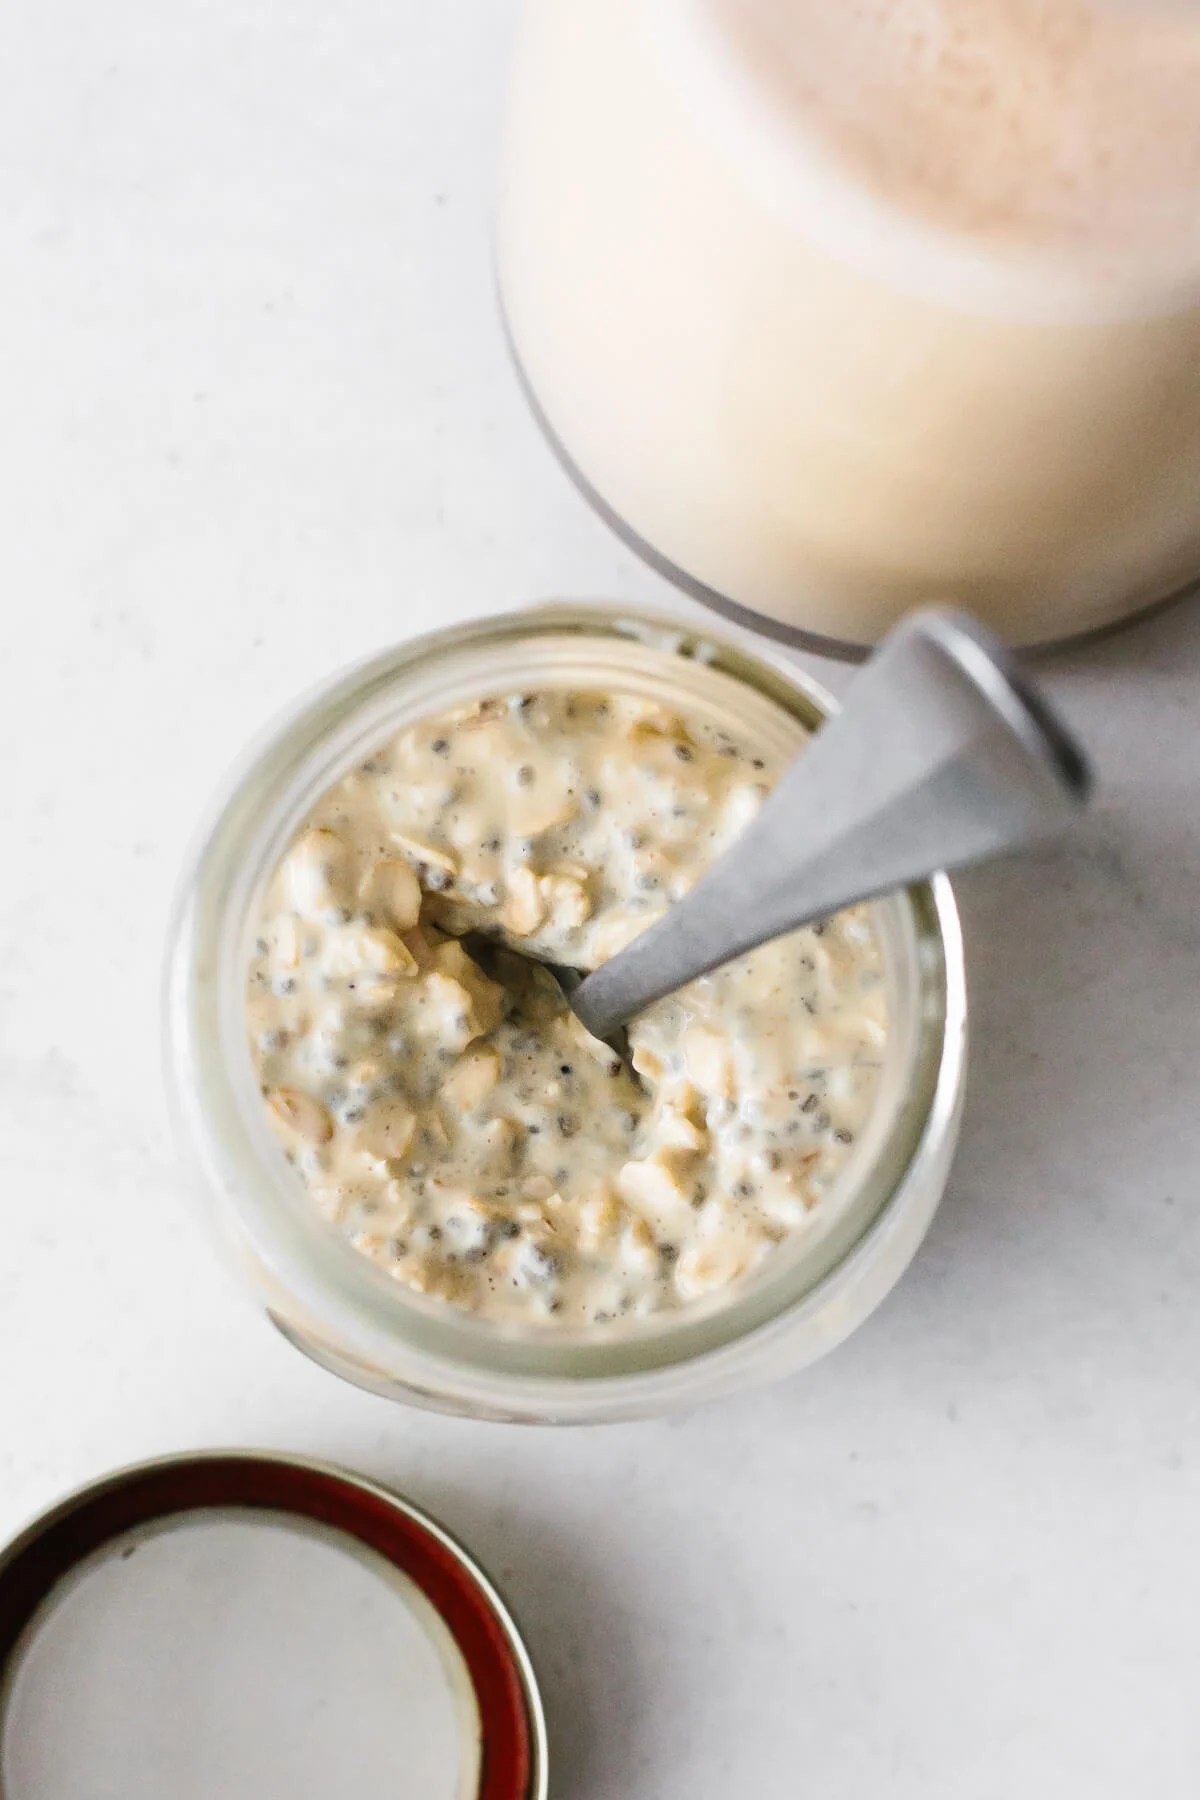 A jar of eggnog overnight oats with a spoon.